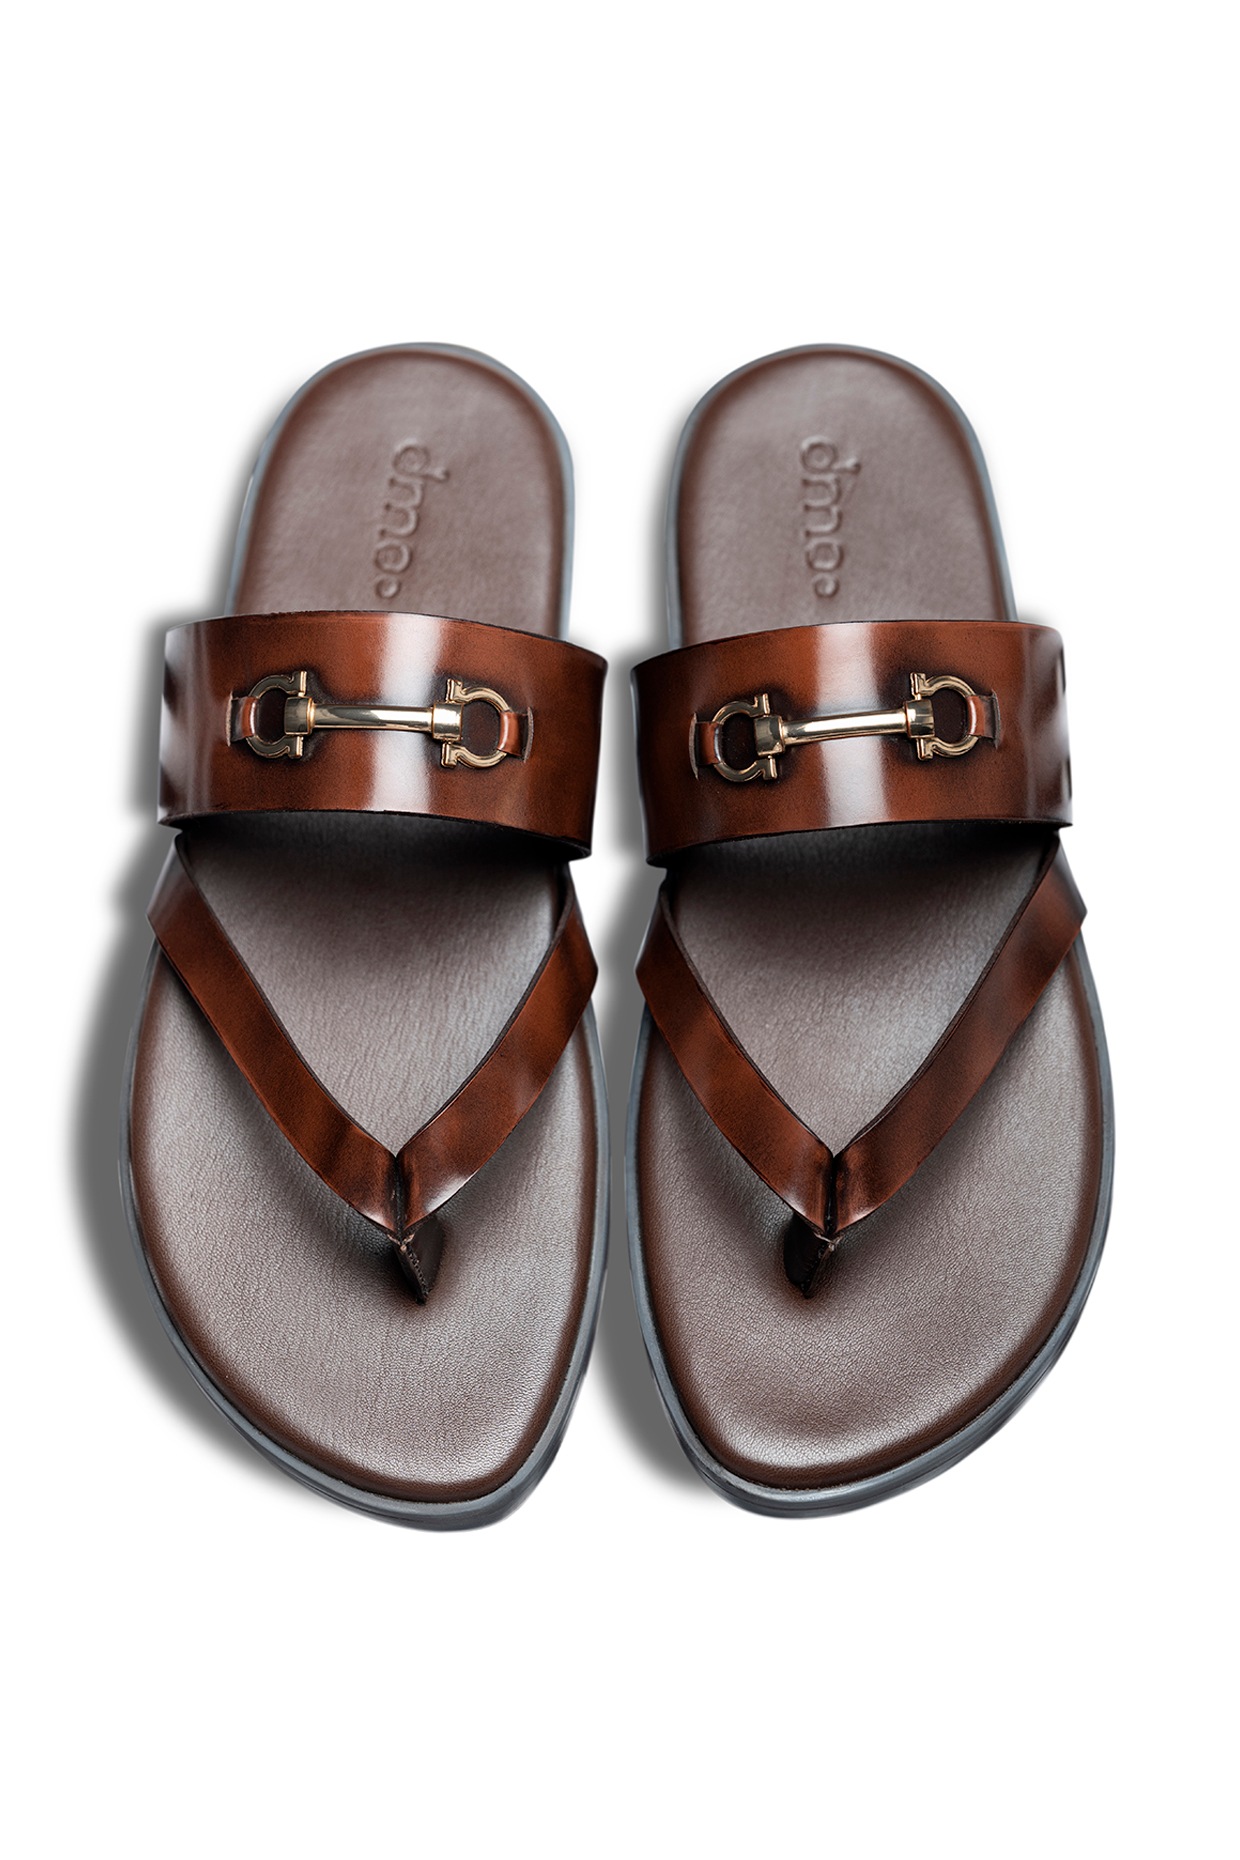 Gucci sandals for men | Buy or Sell your Designer shoes - Vestiaire  Collective